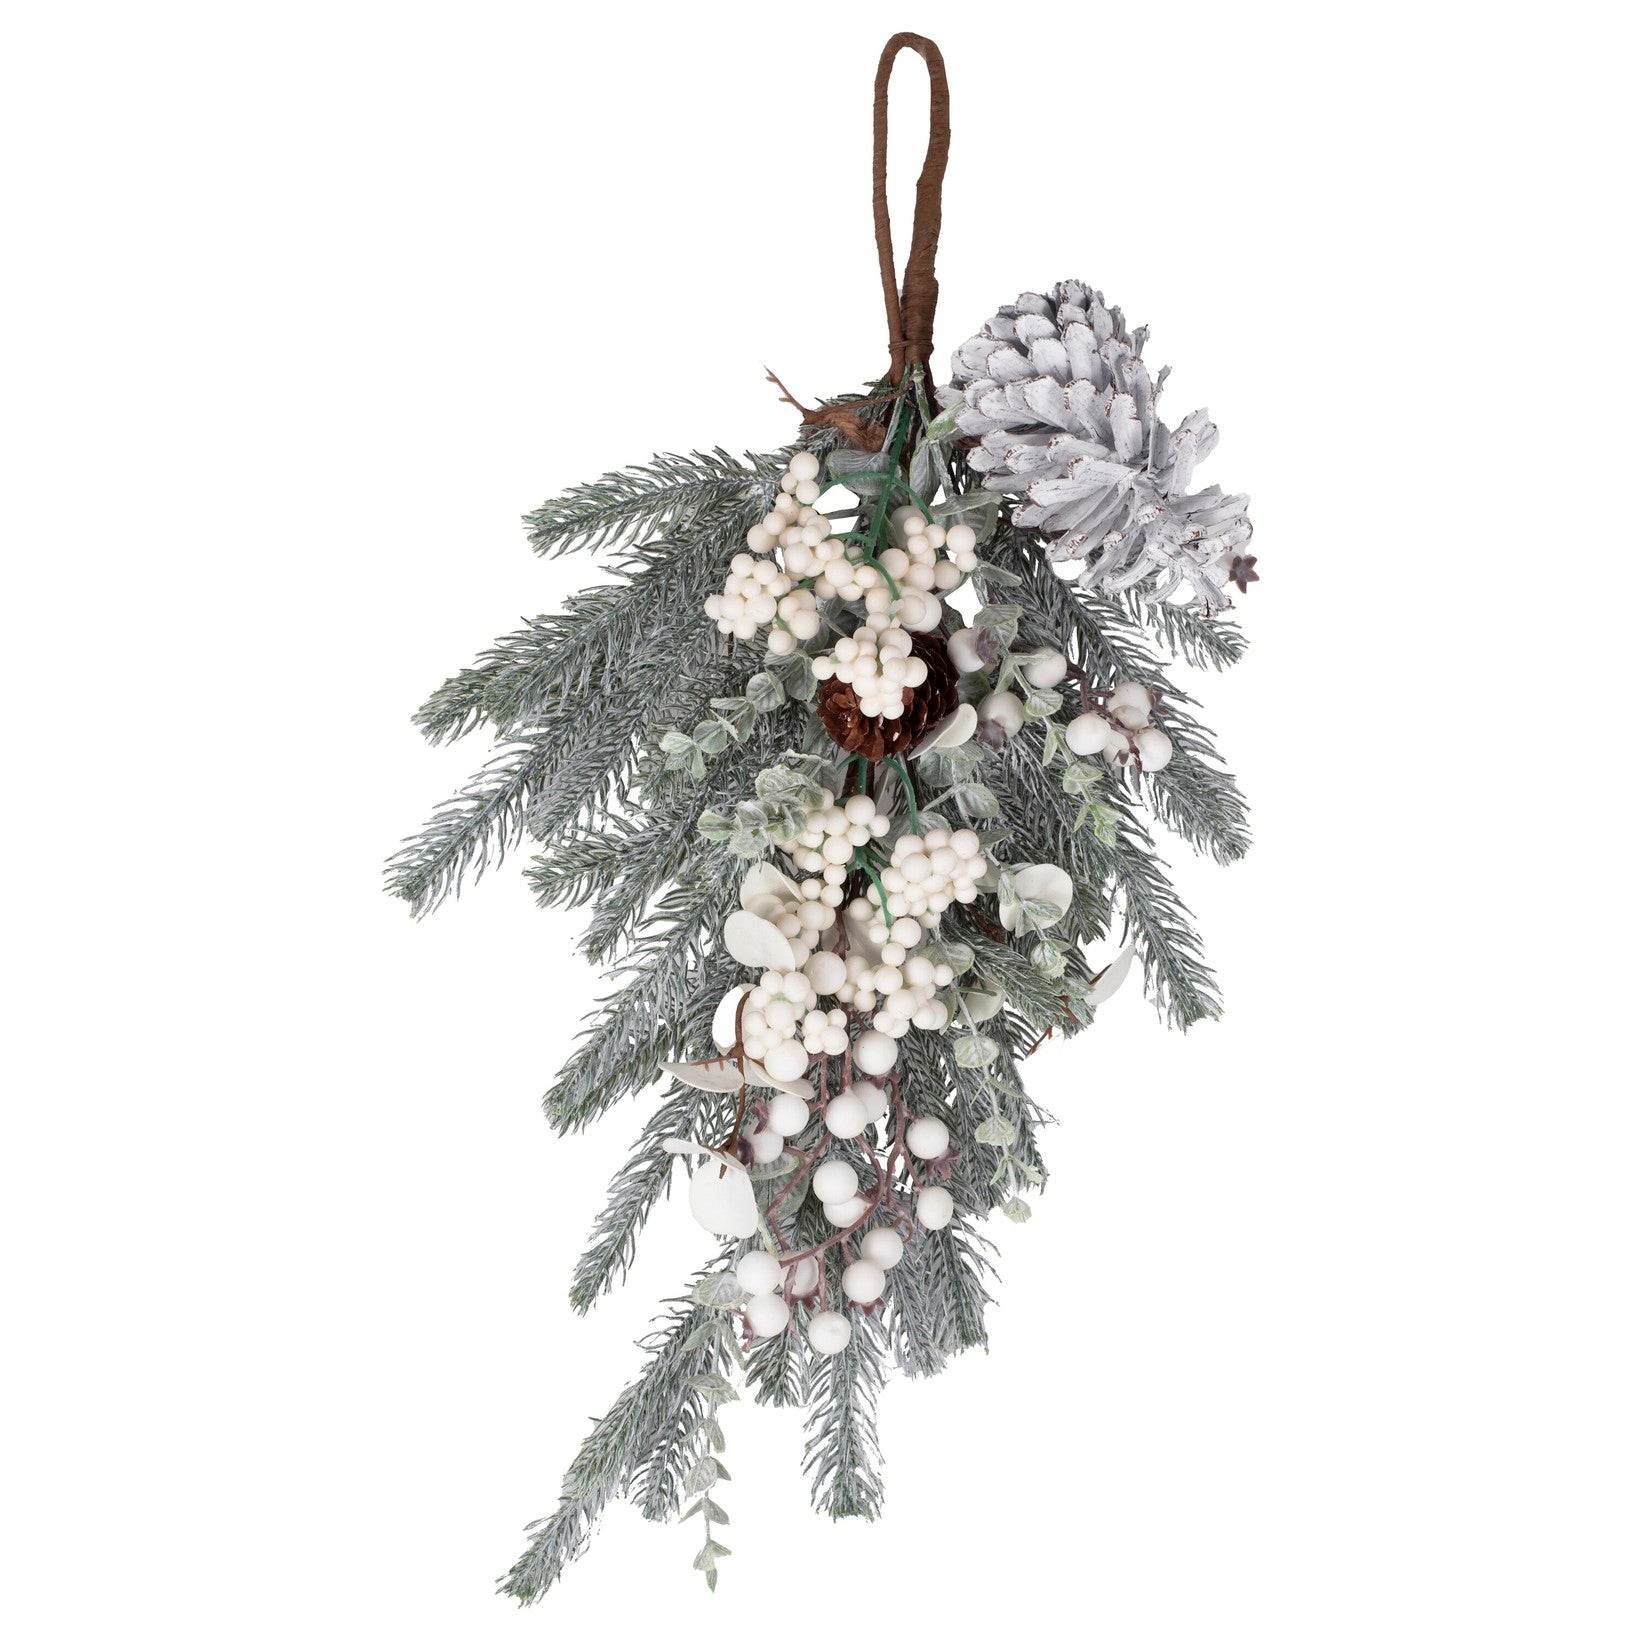 Hanging decoration with branches and cones